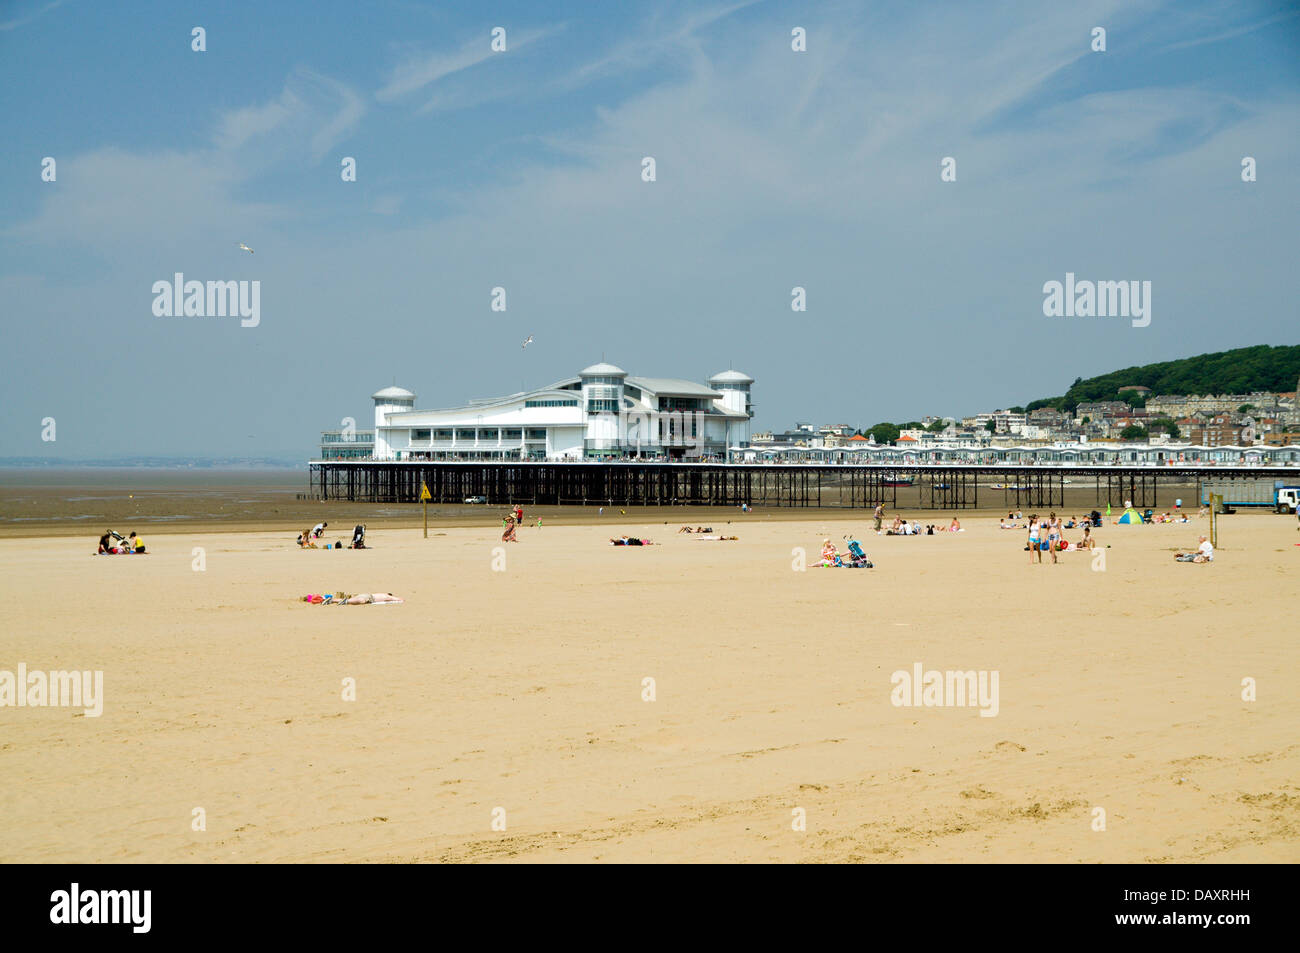 The Grand Pier and beach, Weston-Super-Mare, Somerset, England. Stock Photo